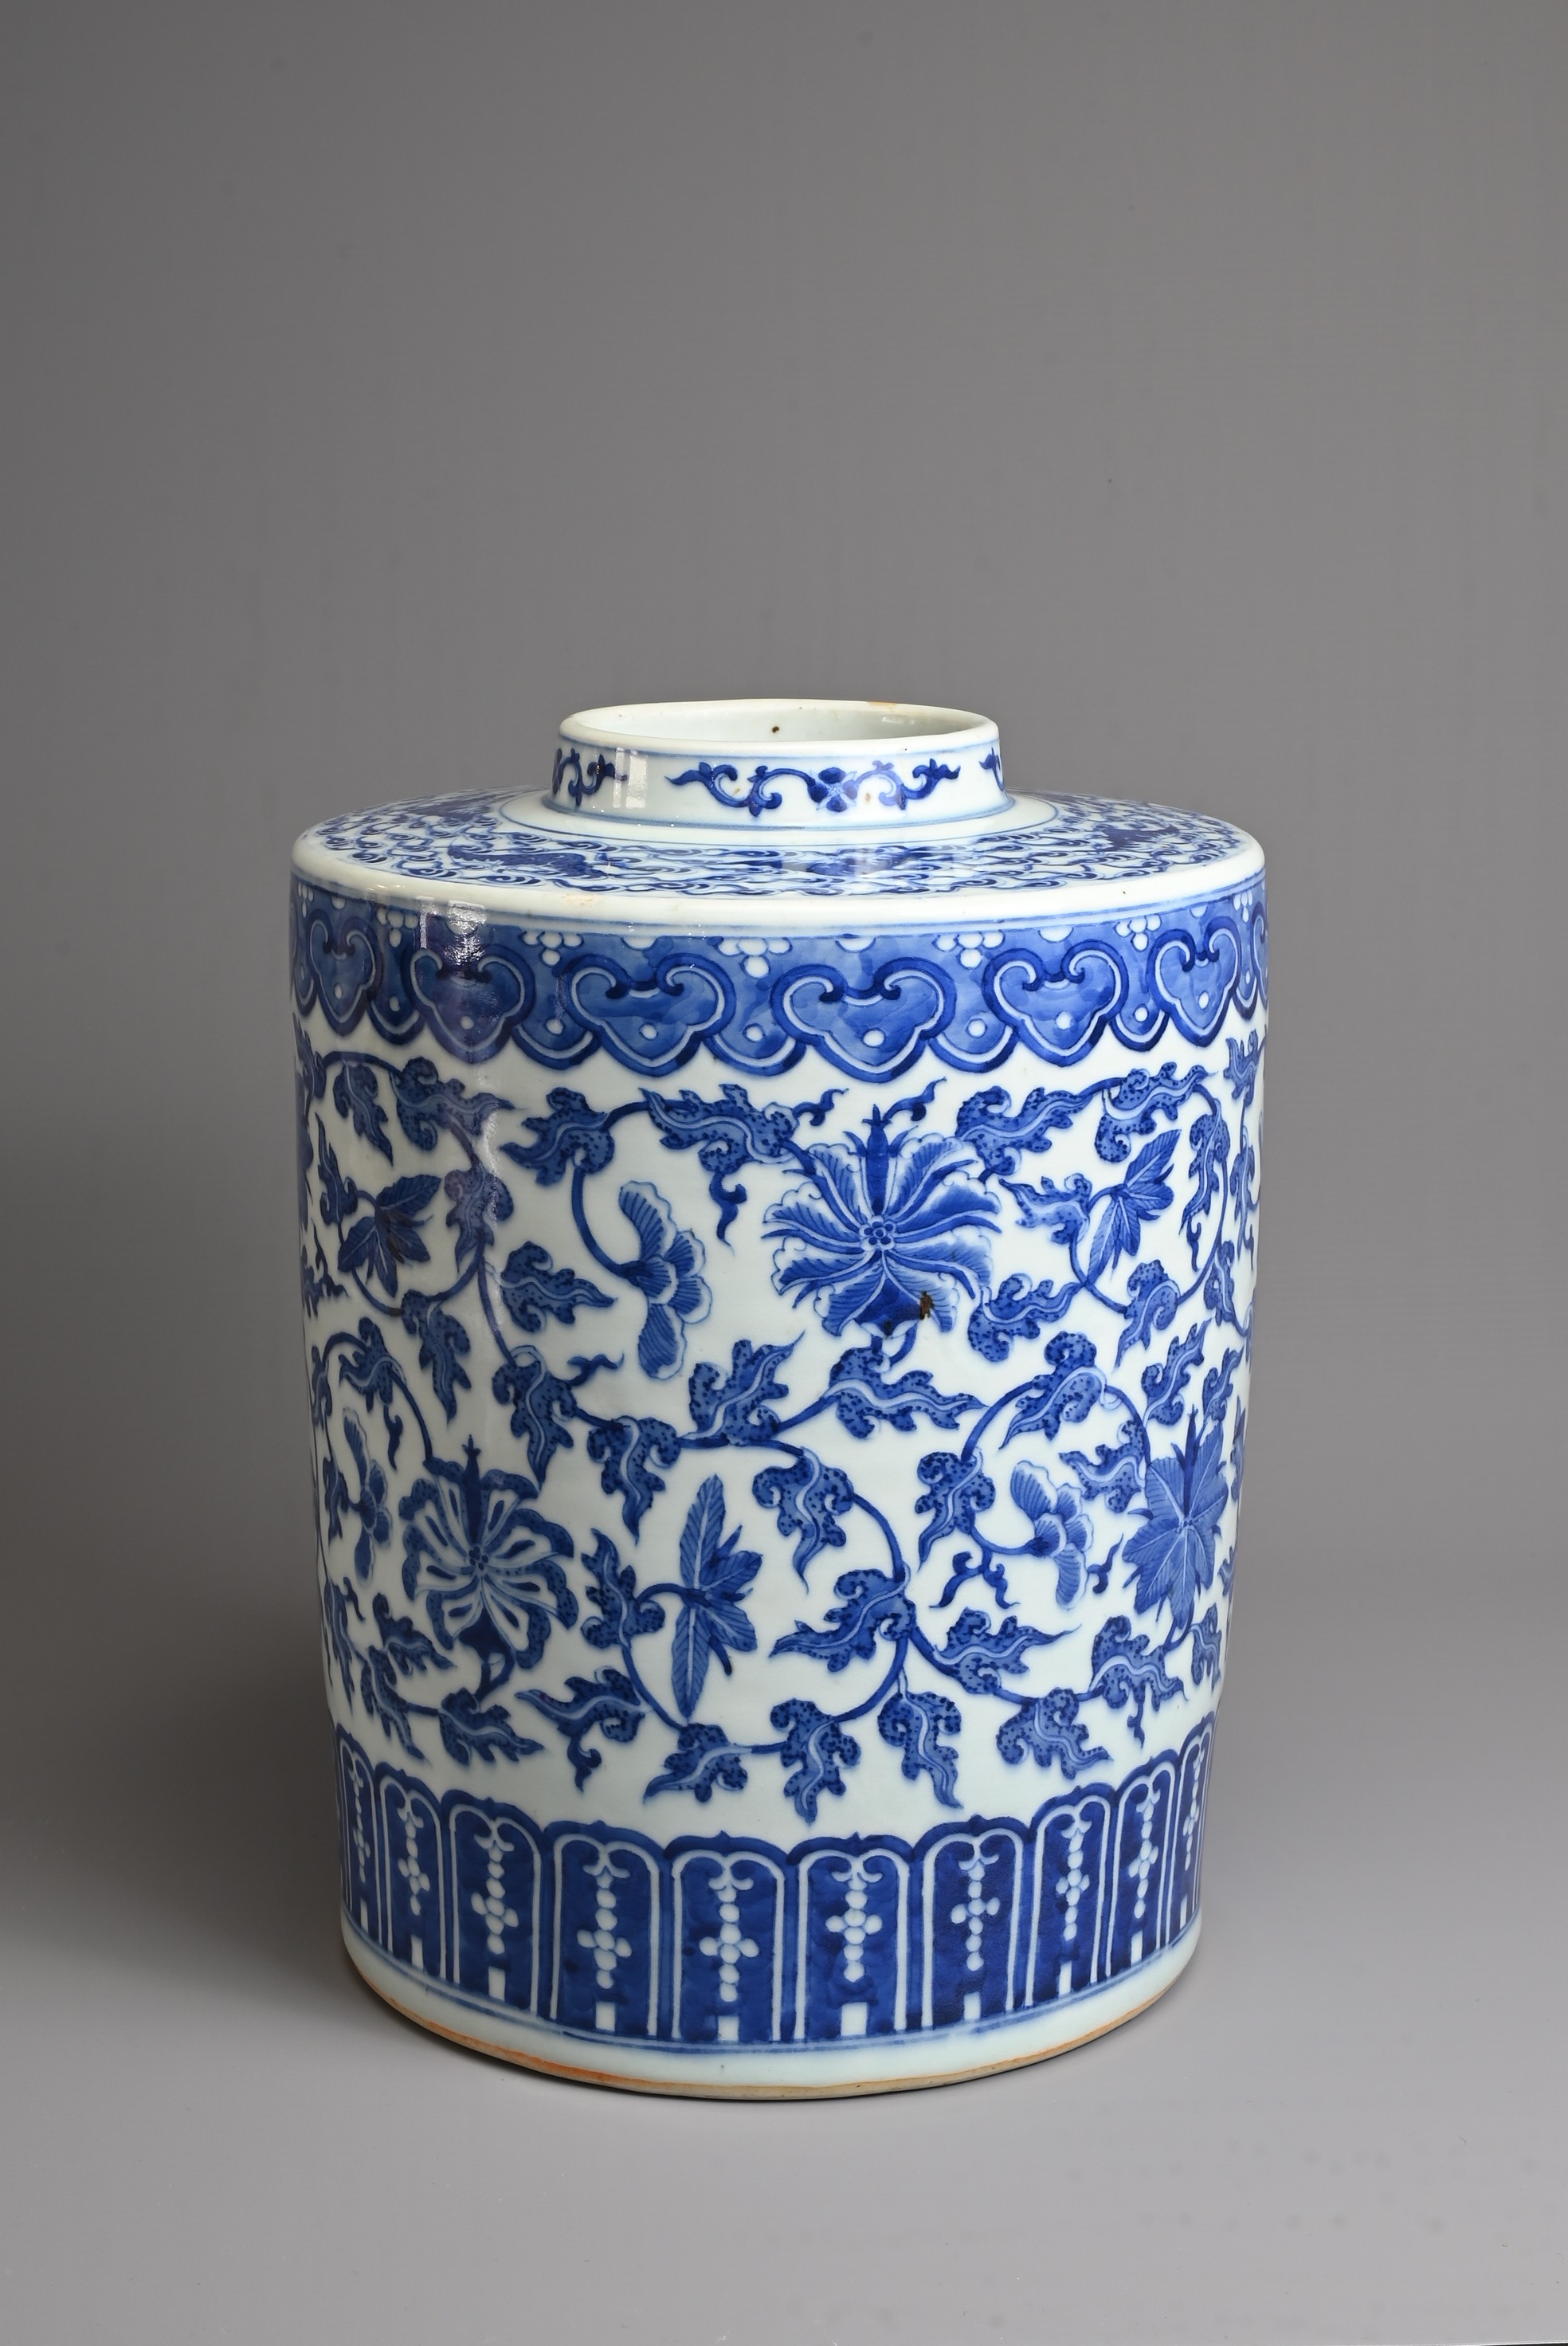 A LARGE CHINESE BLUE AND WHITE PORCELAIN JAR, LATE QING DYNASTY. Heavily potted of cylindrical